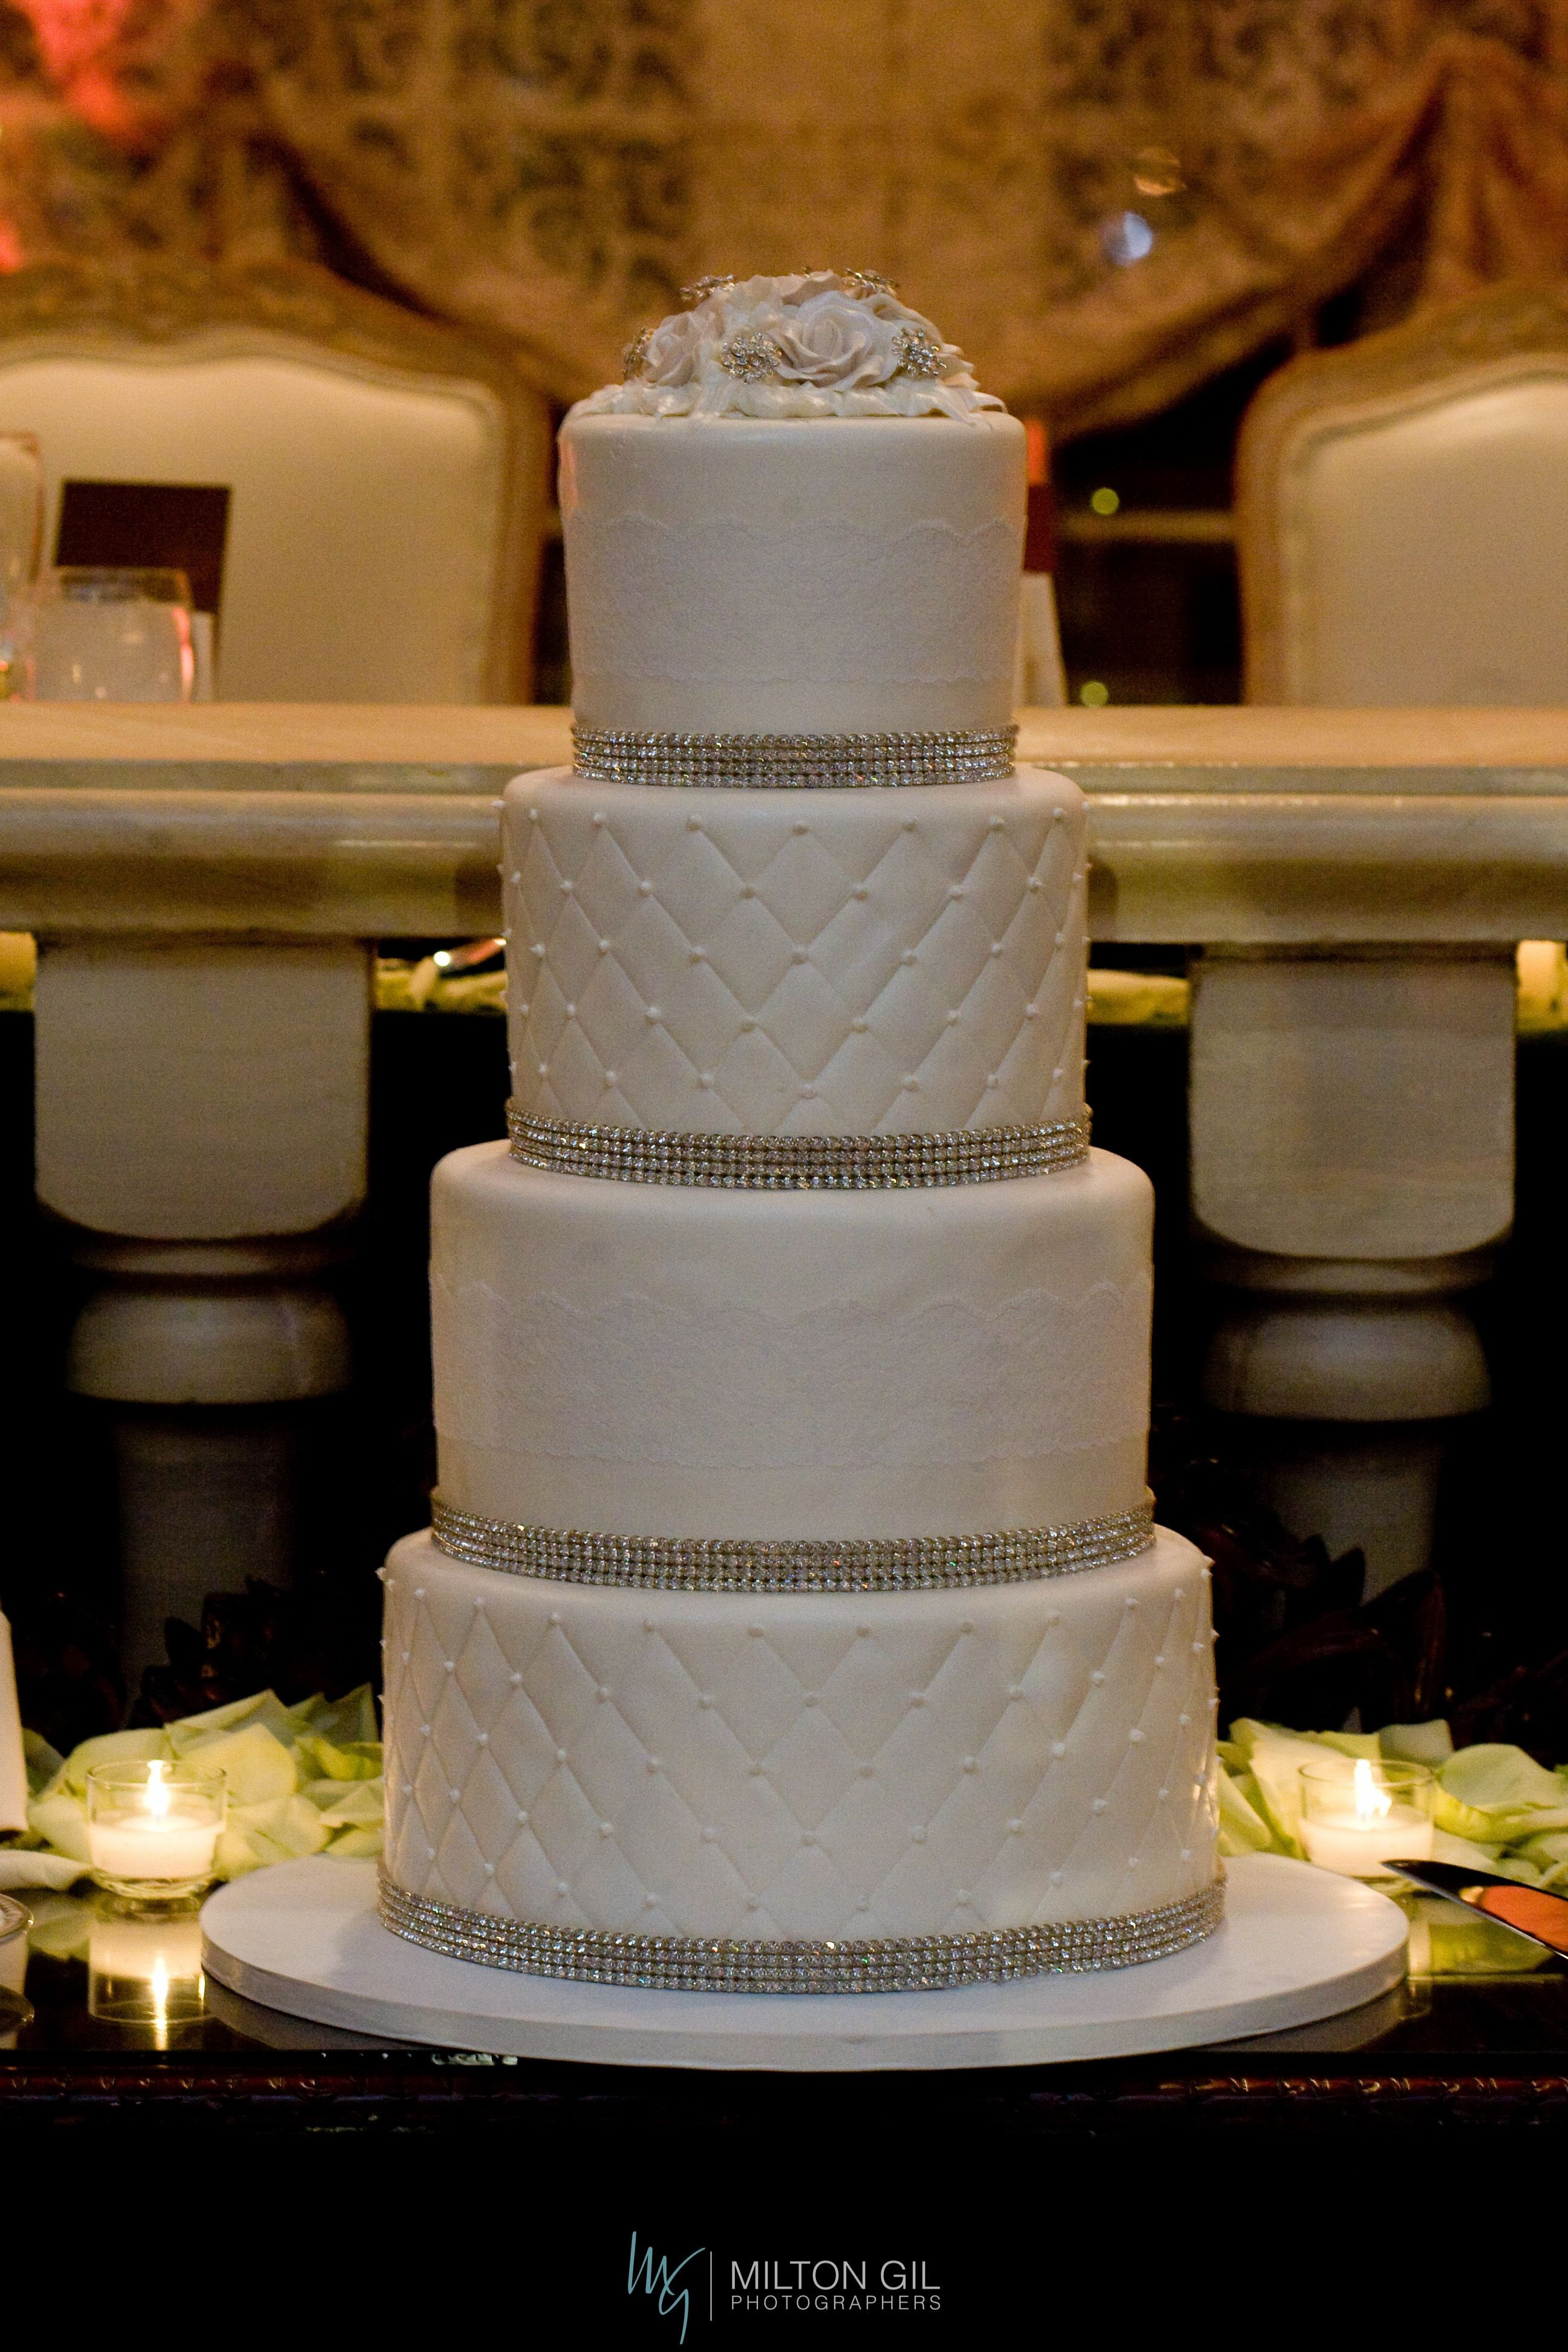 13 Stunning Wedding Cake Vases 2024 free download wedding cake vases of wedding cakes cost new wedding how much does the average wedding intended for wedding cakes cost new elegant wedding cake njweddings northjerseyweddings of wedding cake